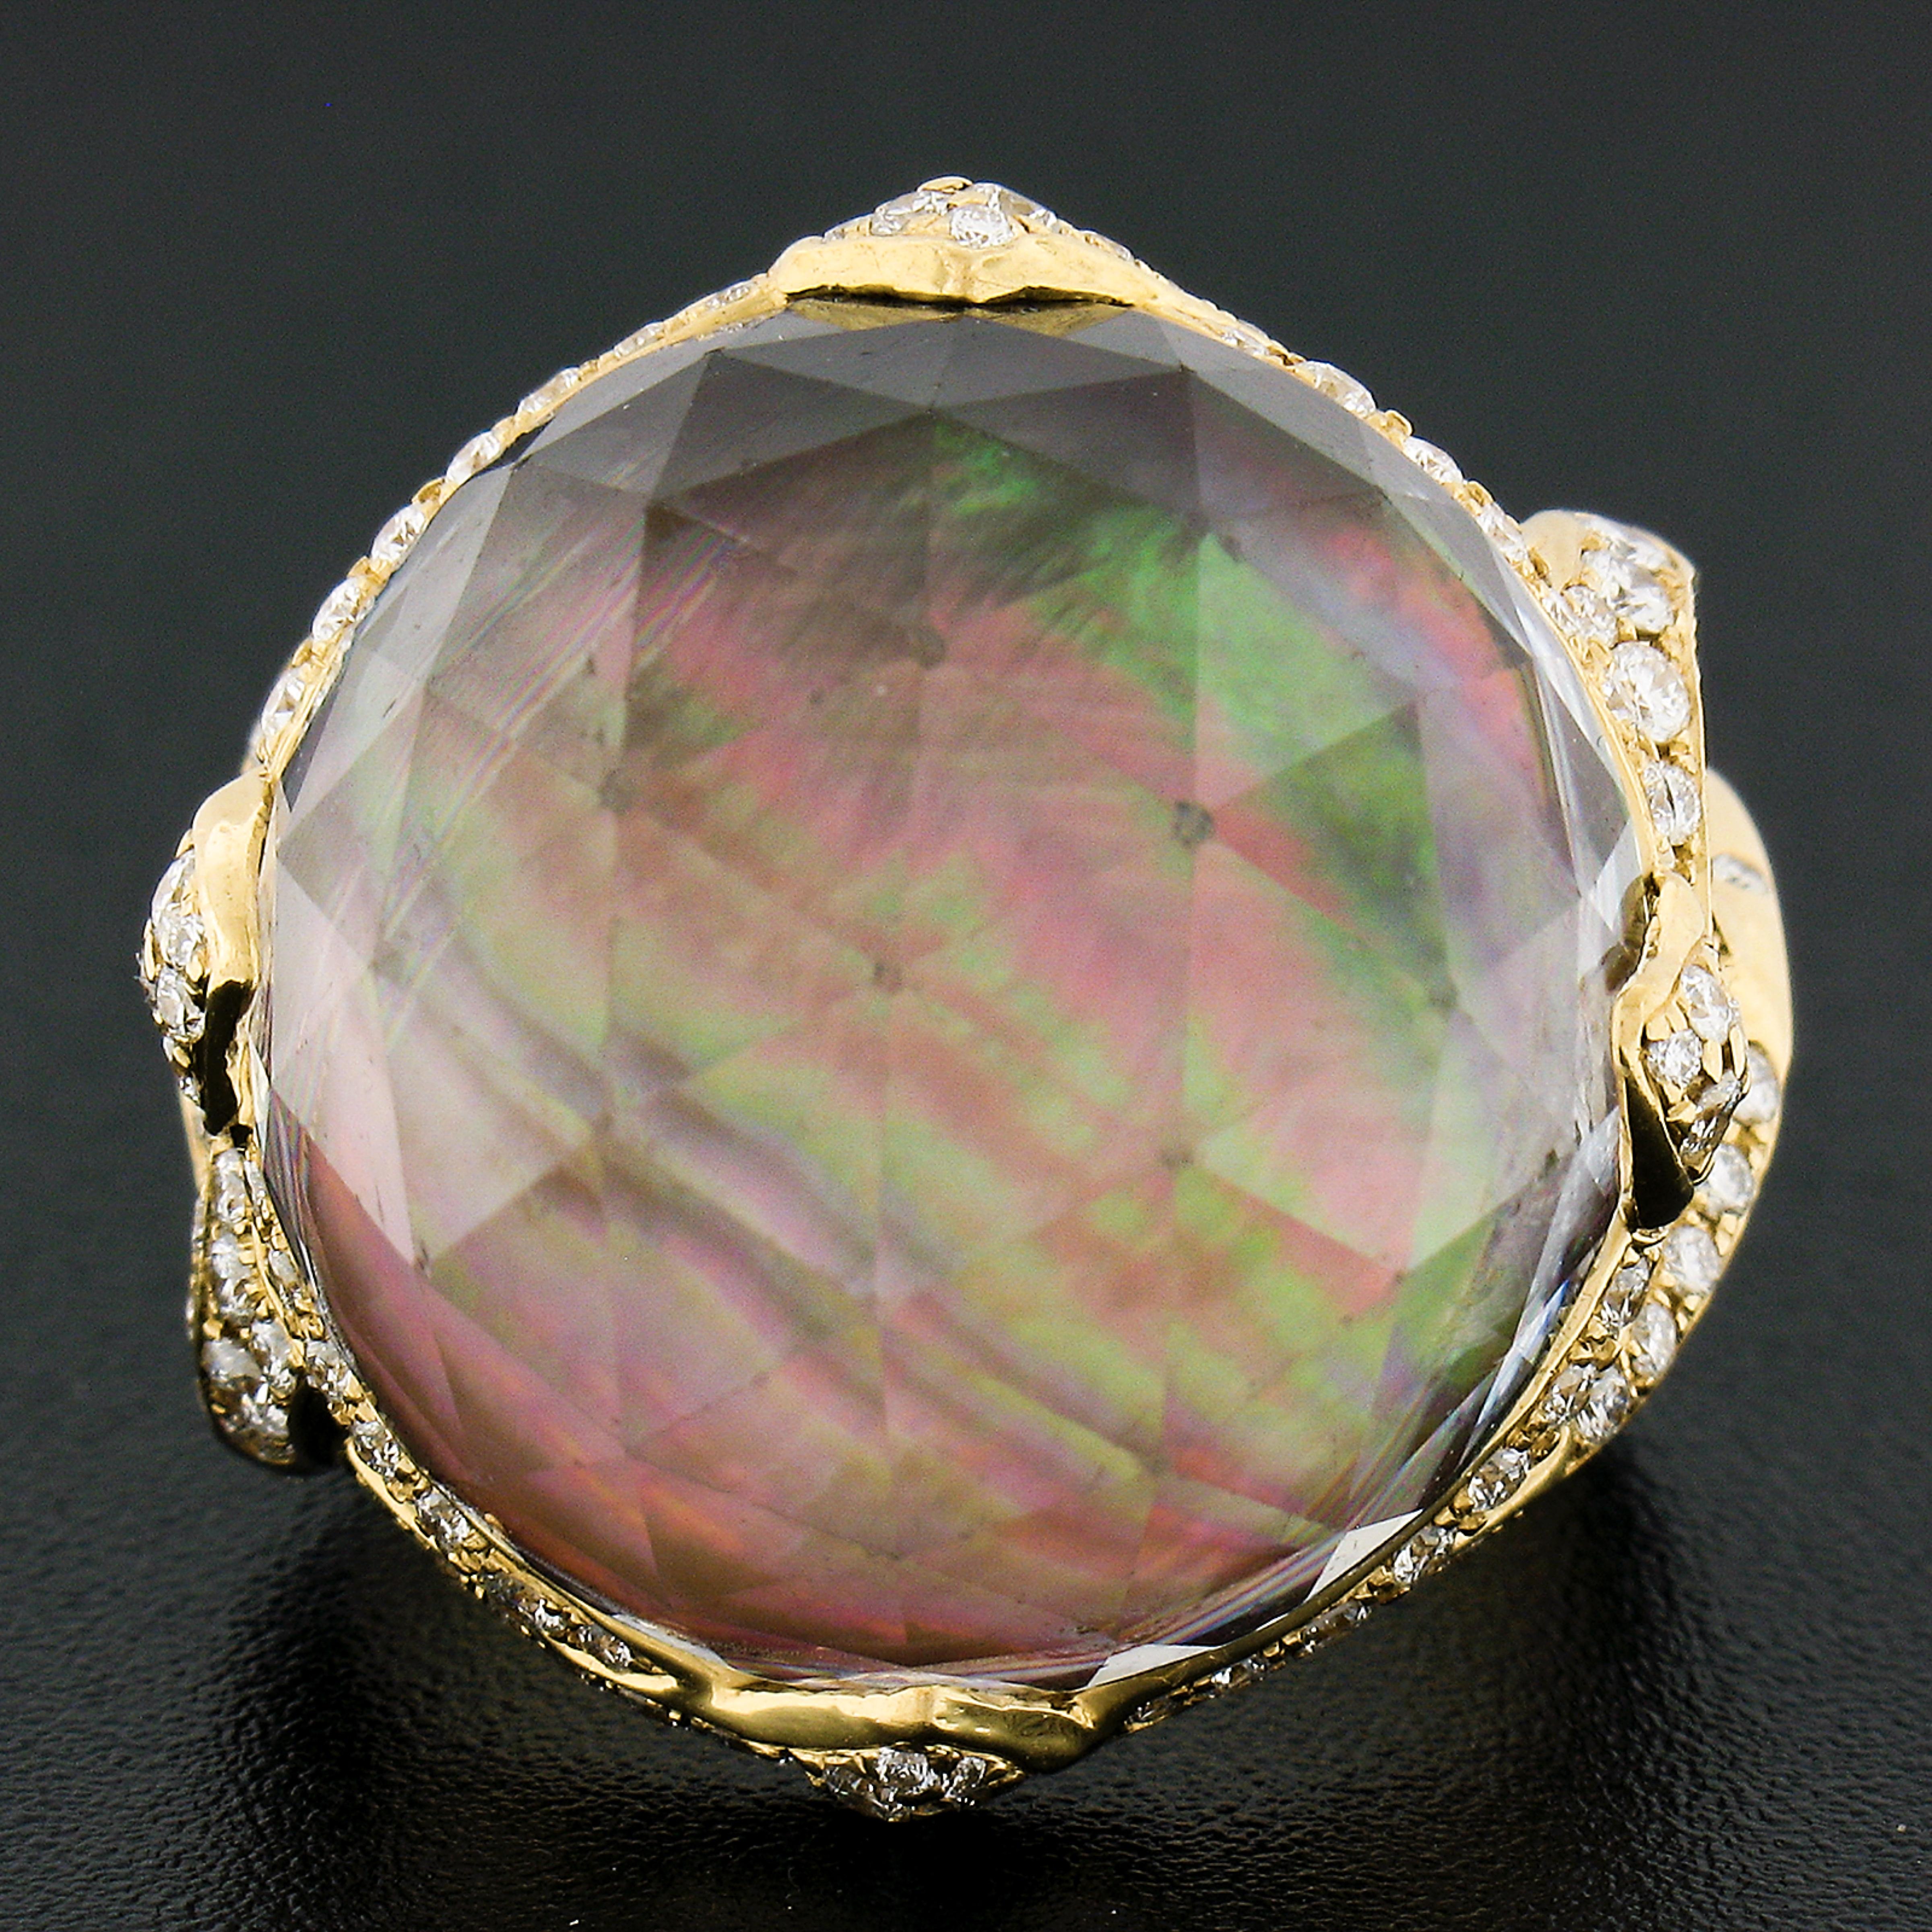 This gorgeous cocktail ring was crafted from solid 18k yellow gold. The ring features a large rock crystal stone that sits on a black mother of pearl disk giving it a great look & a beautiful play of colors. The crystal is a large round faceted cut.